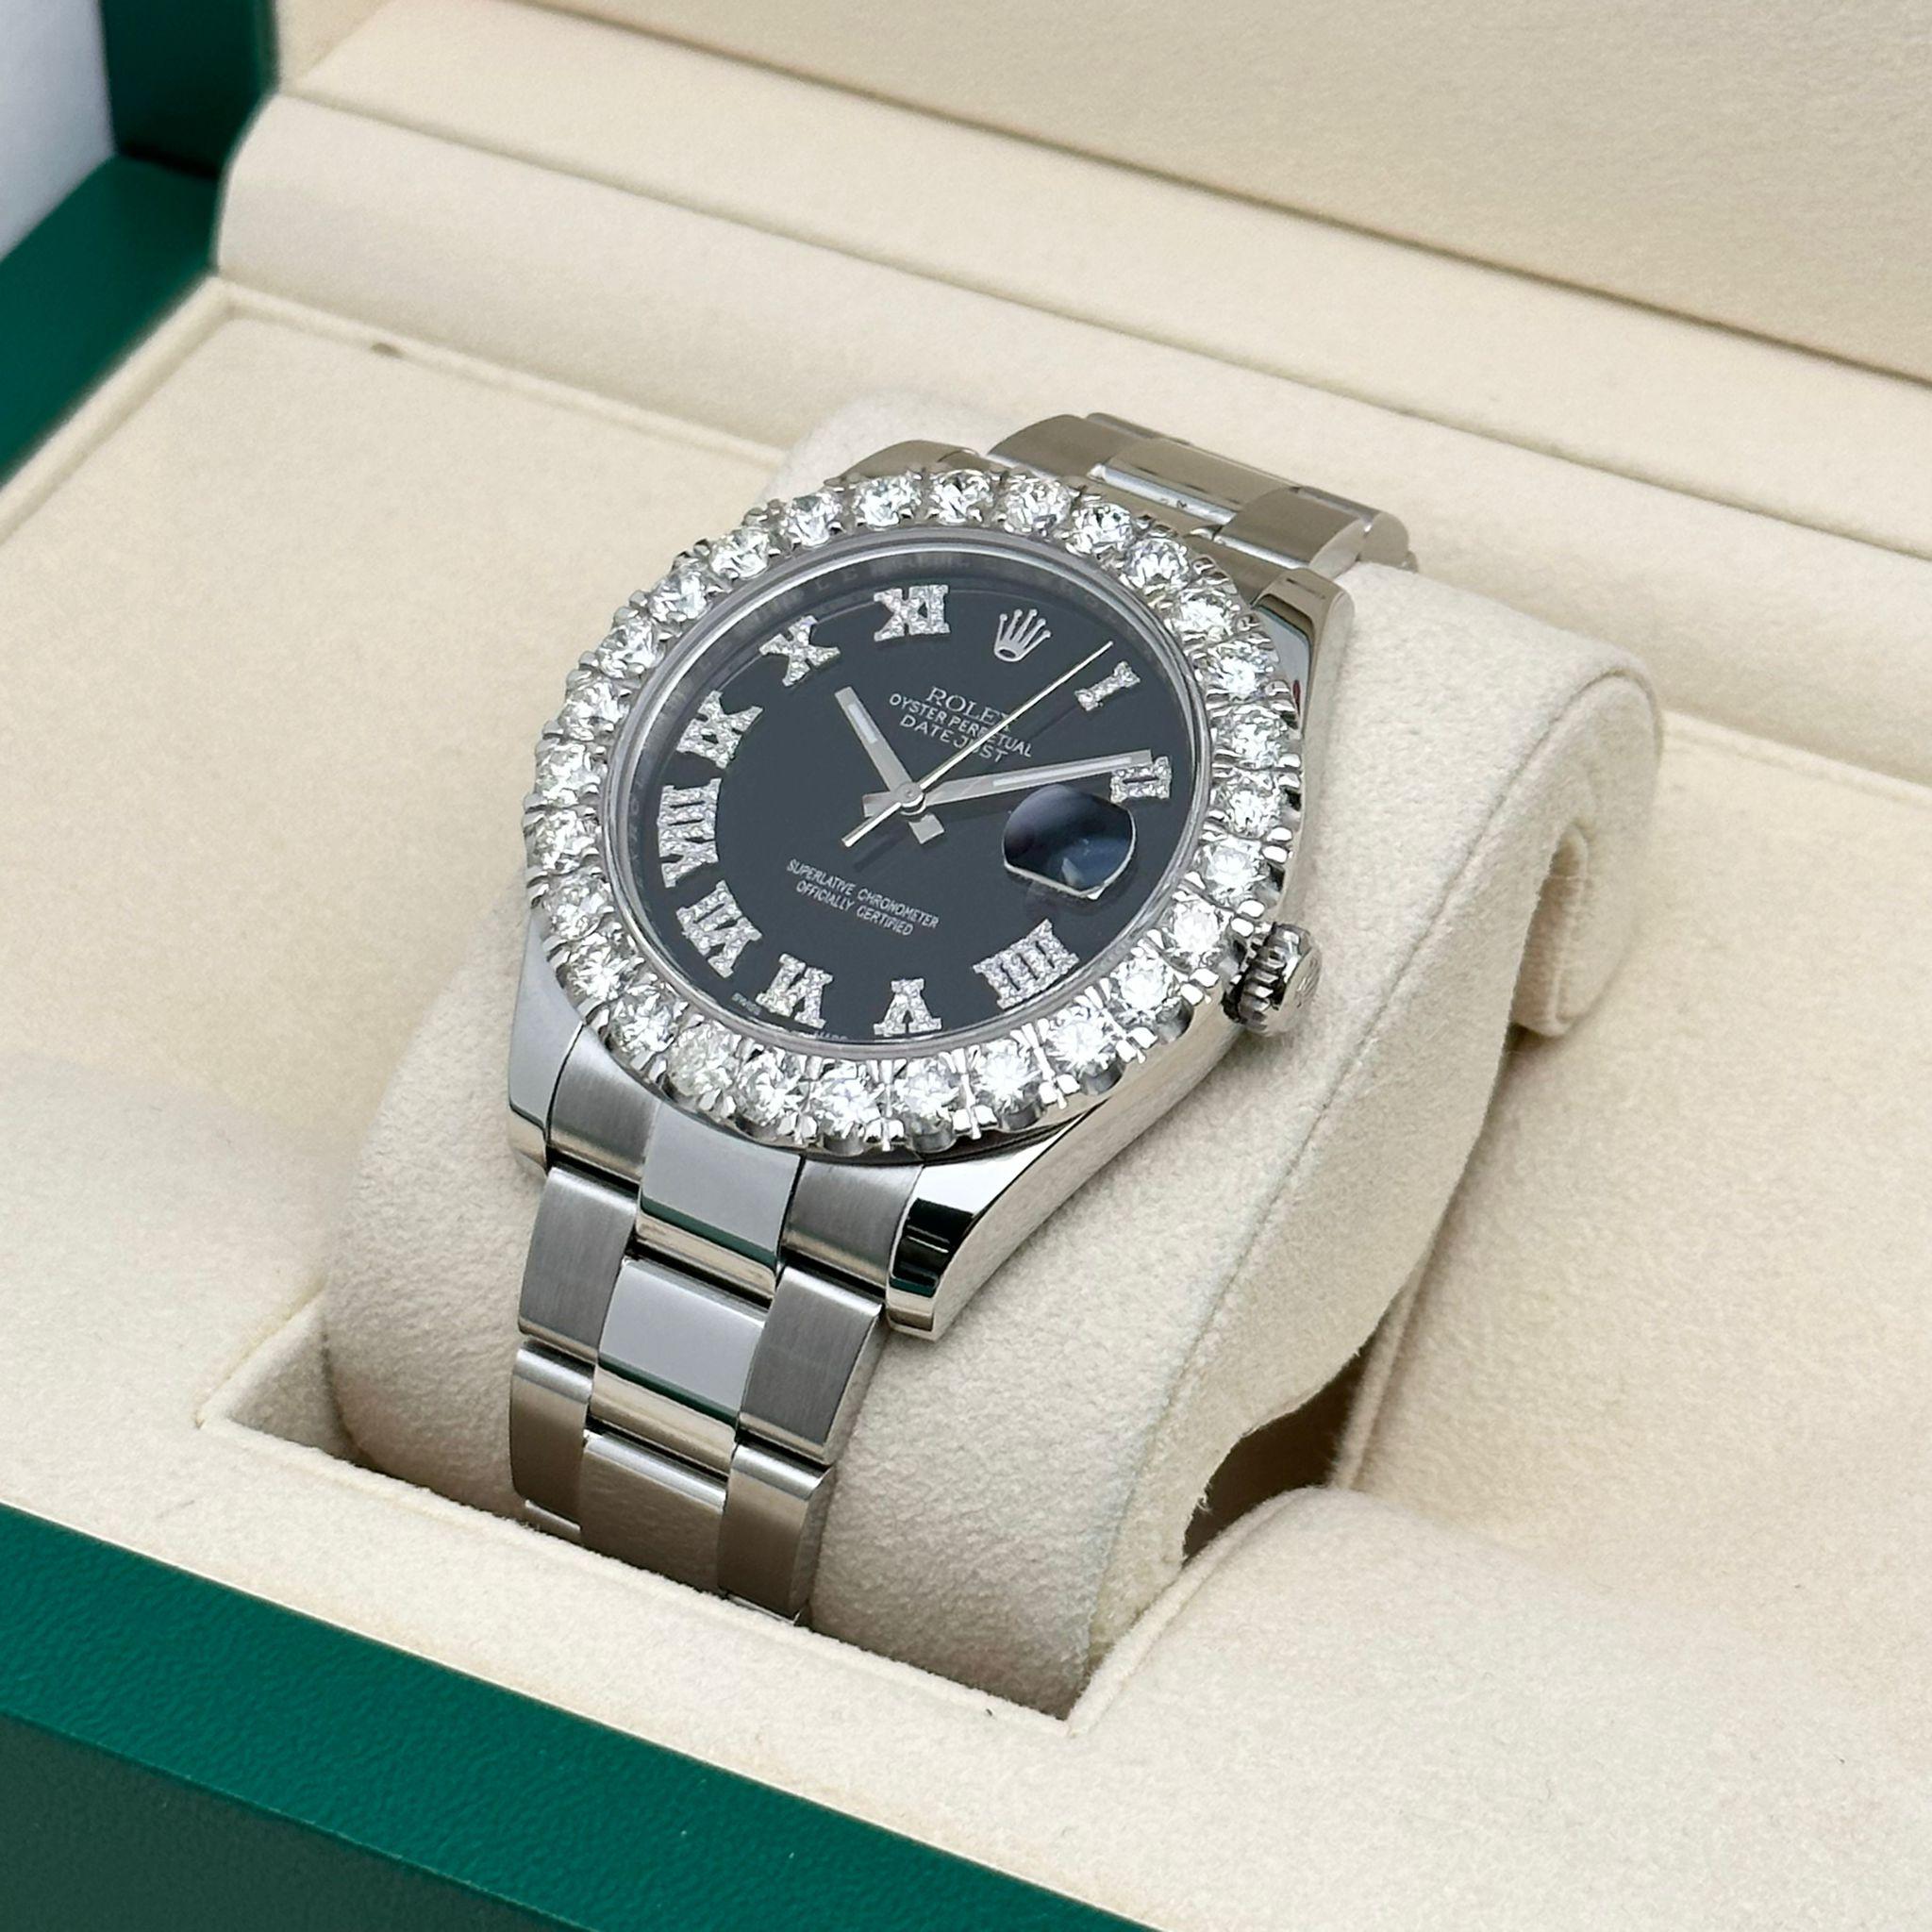 Aftermarket Diamond bezel Total weight 1.15 CT. Aftermarket Dial. The original box is included. No Papers.

* Free Shipping within the USA
* Two-year warranty coverage
* 14-day return policy with a full refund. 
* Kindly be aware that international